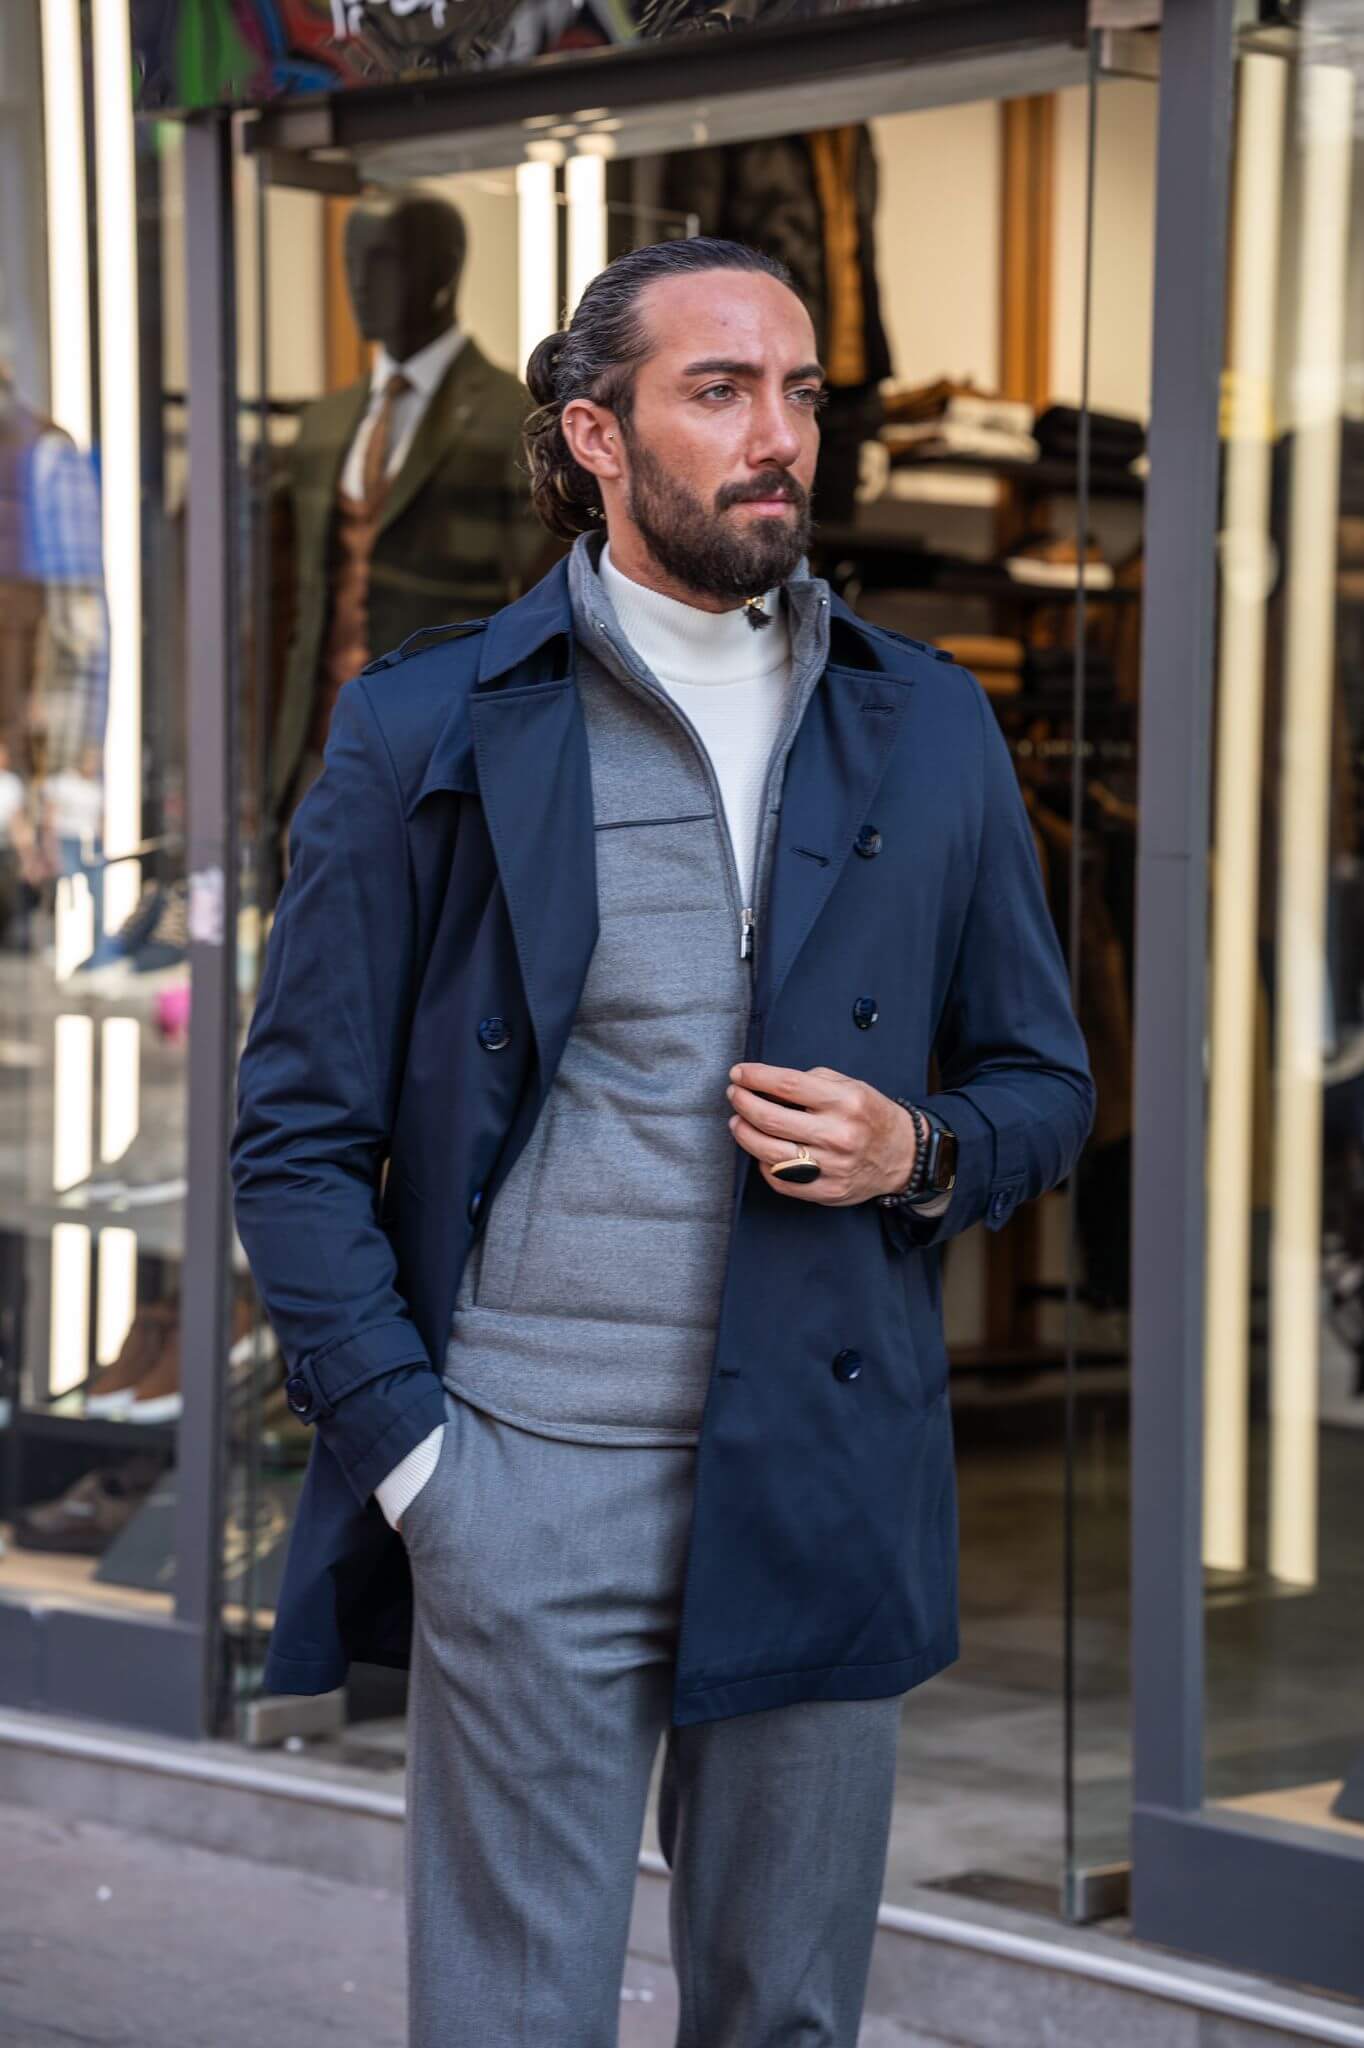 Chic and suave: our male model effortlessly rocks a navy blue trench coat.